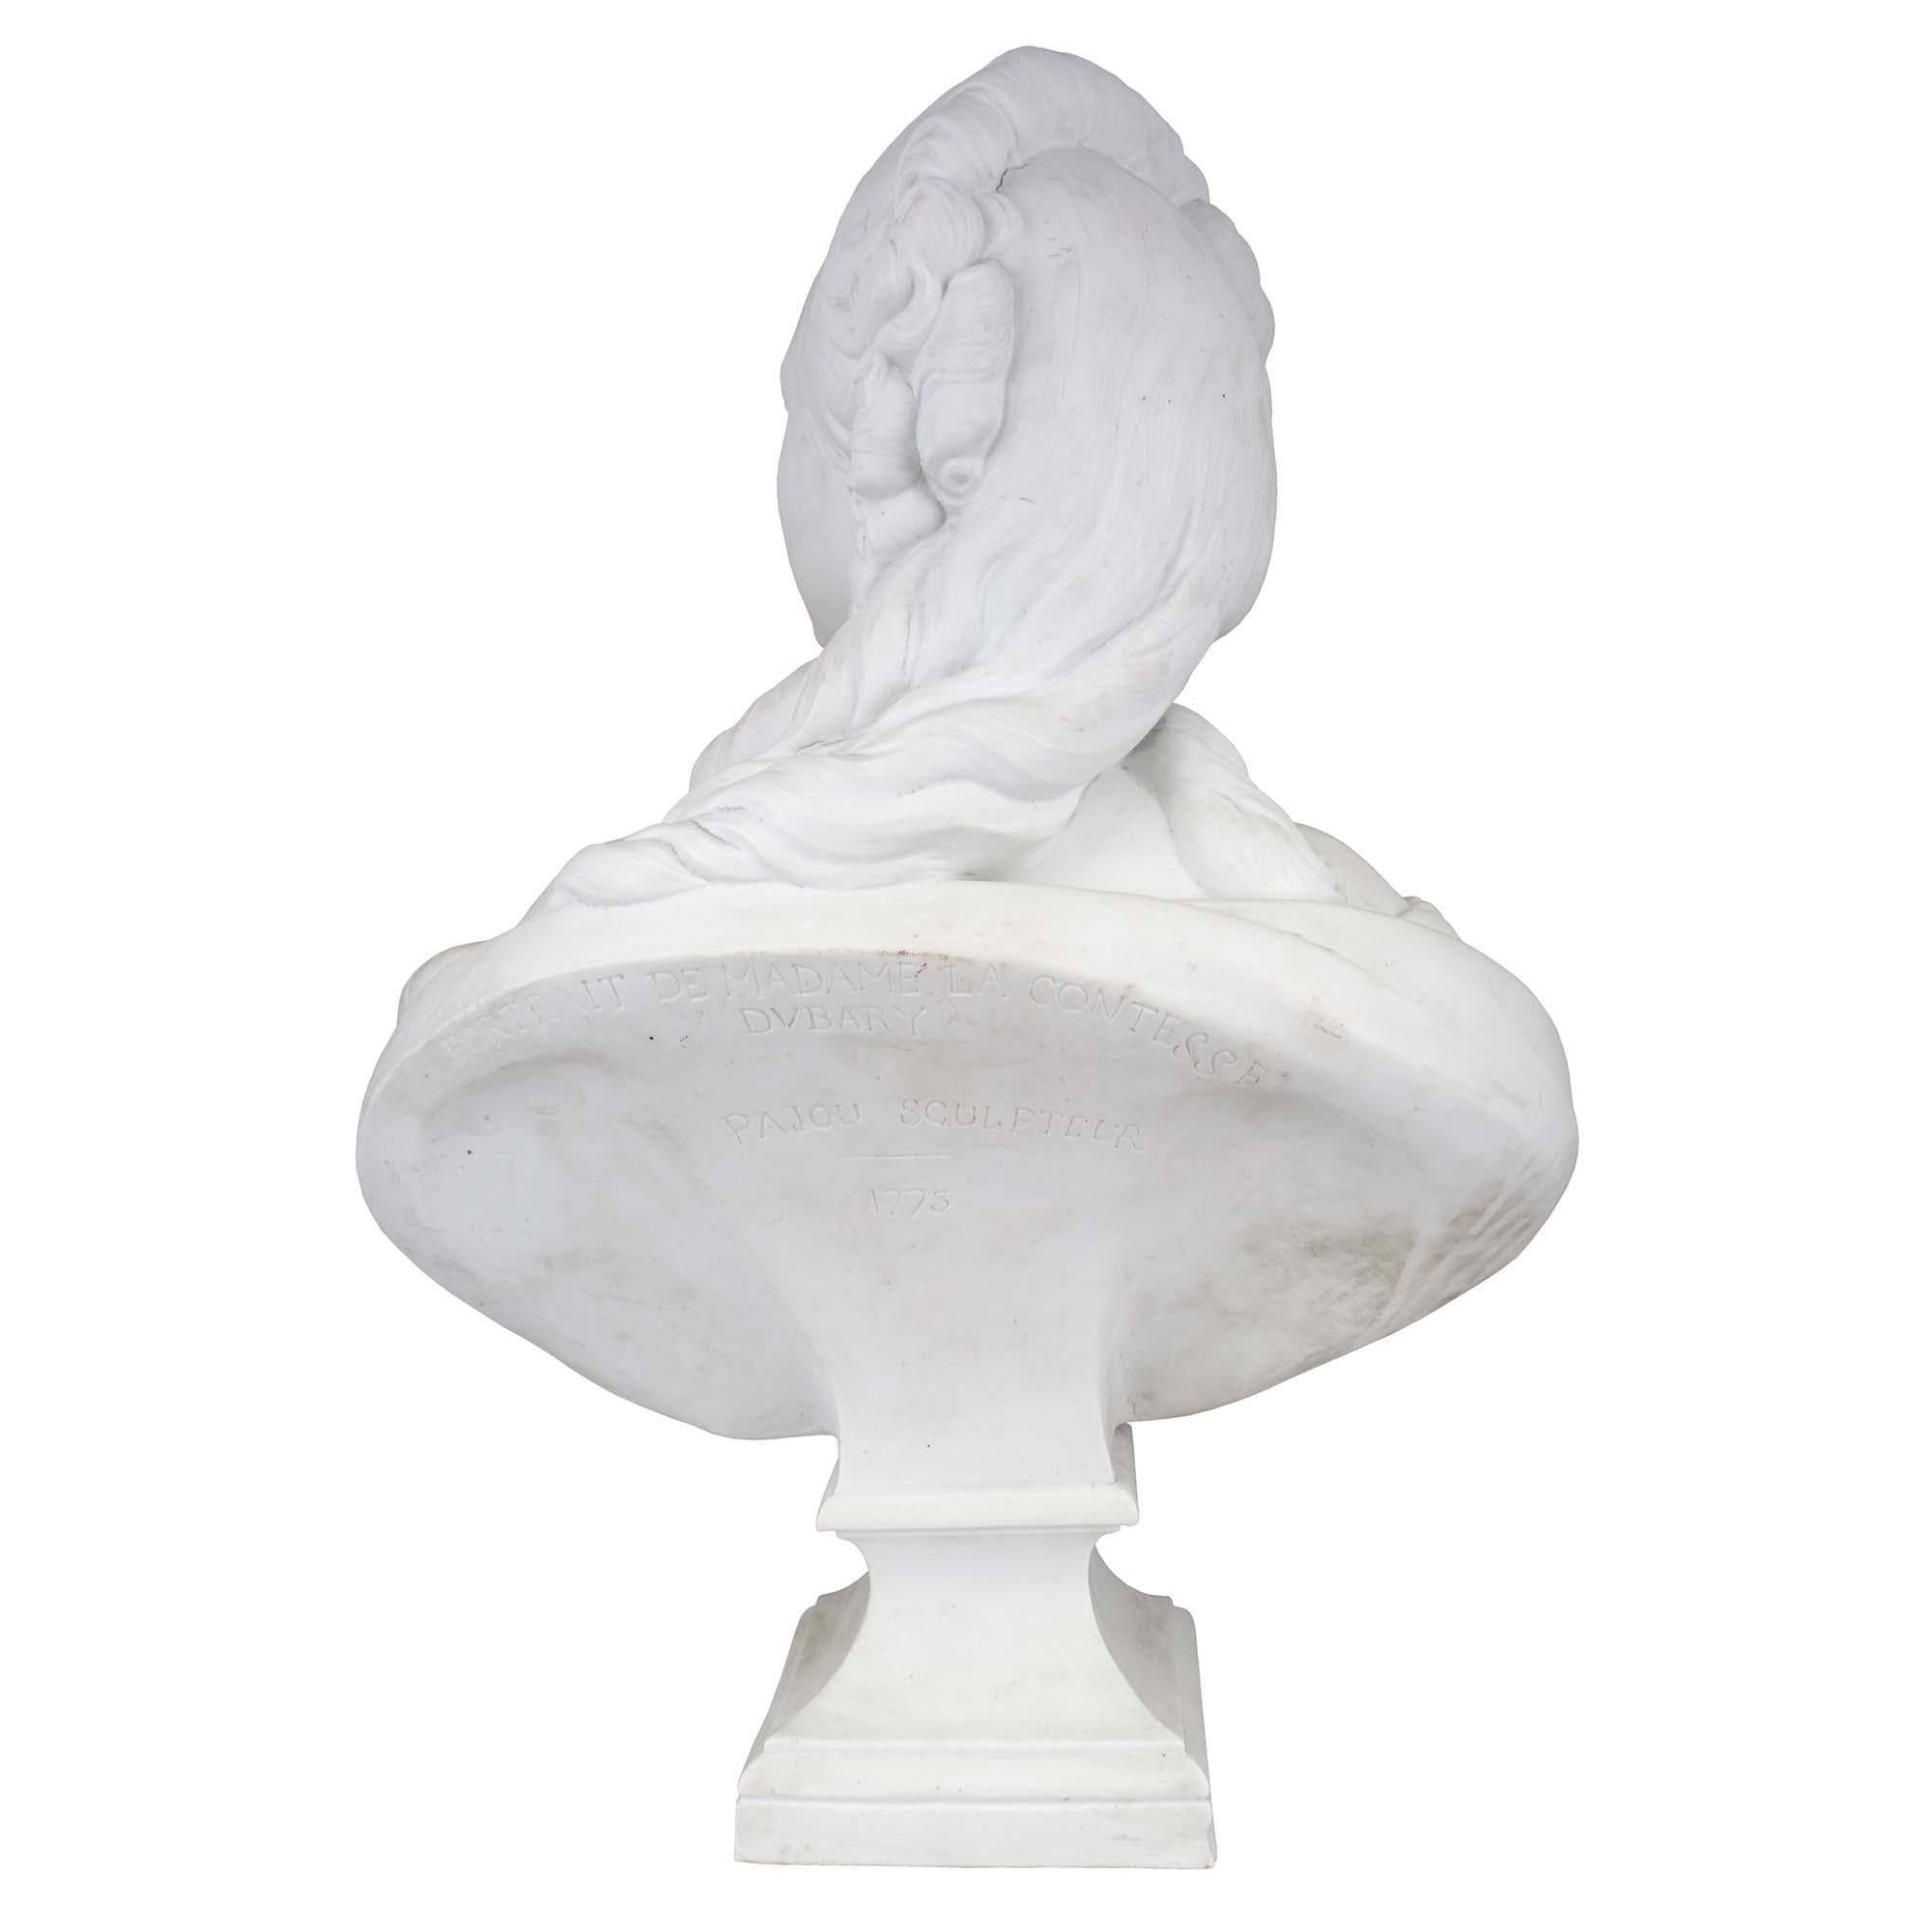 French 19th Century Louis XVI Style Biscuit de Sevres Porcelain Bust In Good Condition For Sale In West Palm Beach, FL